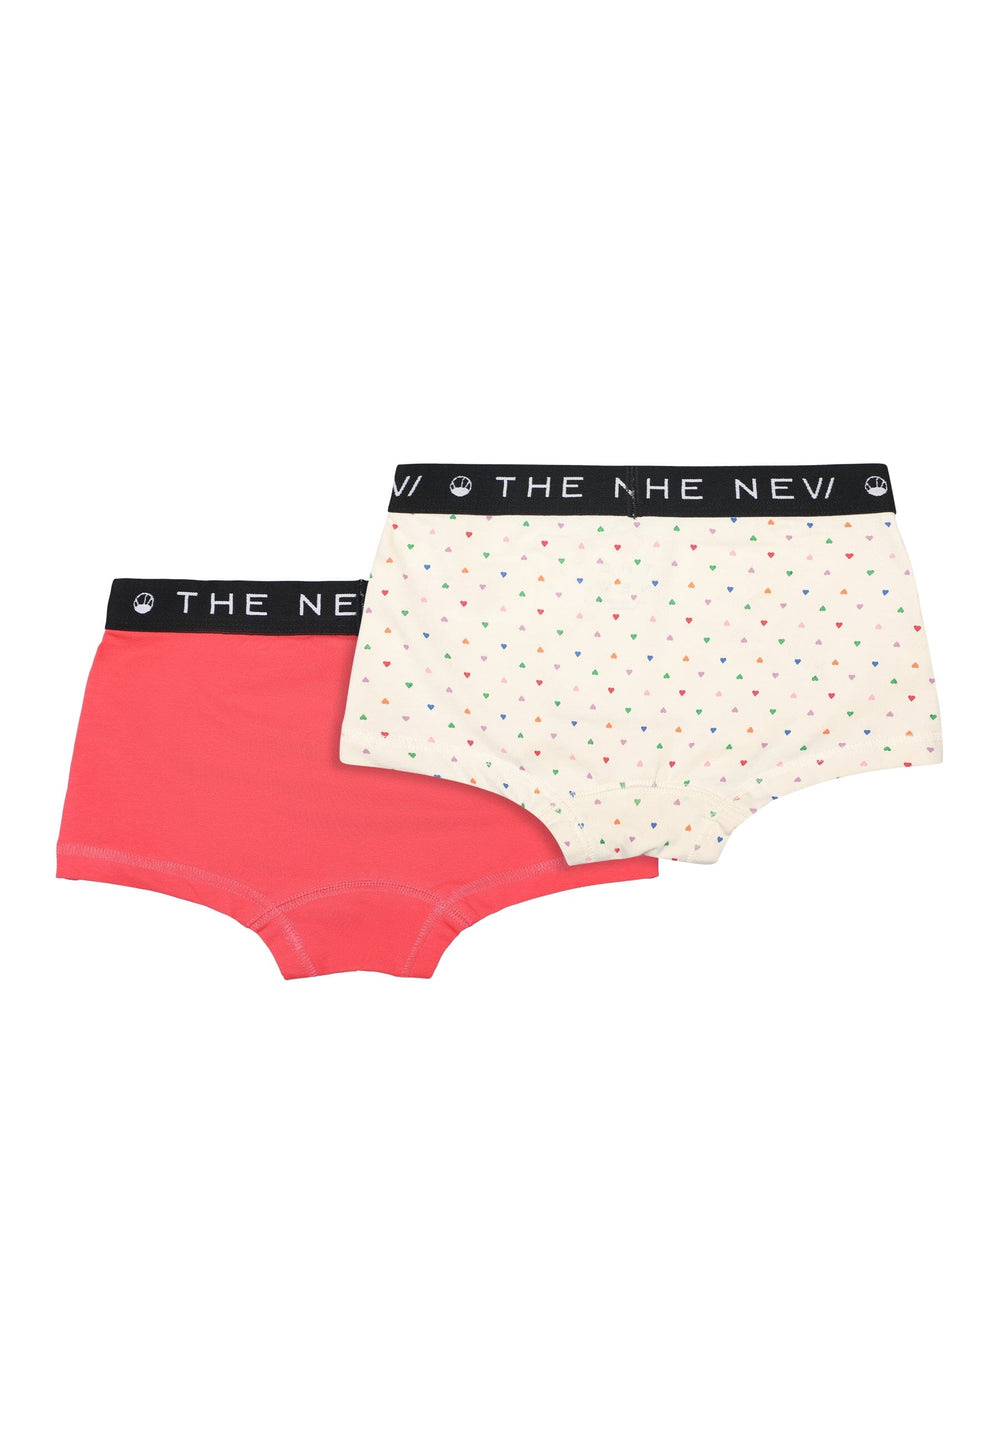 The New - The New Hipsters 2-Pack - Geranium Undertøj 